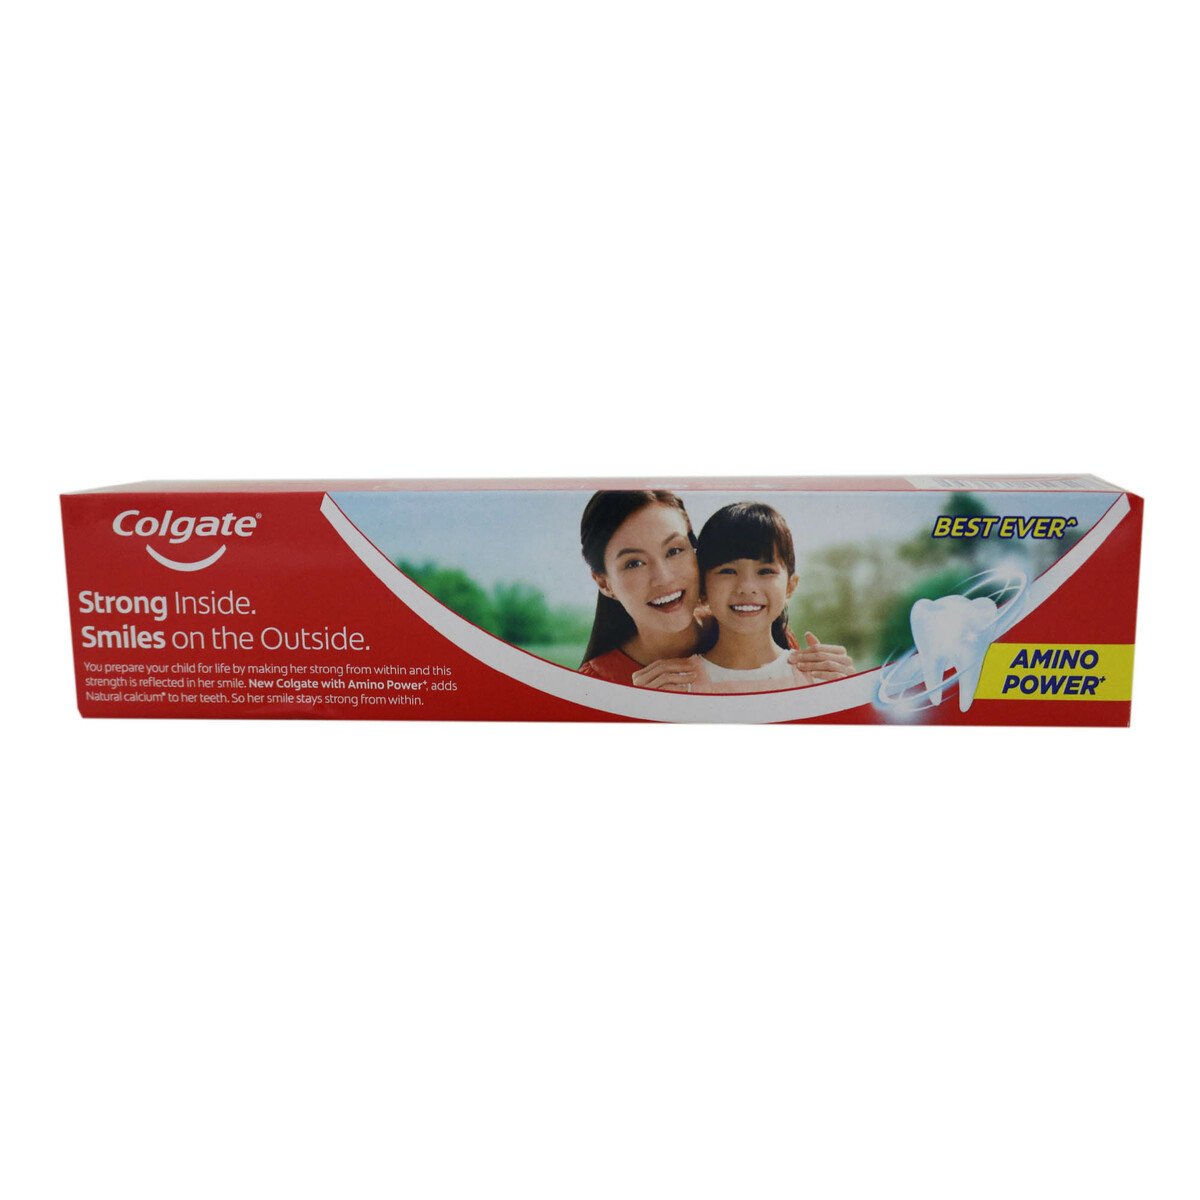 Colgate Tooth Paste Ice Cool Mint 175g